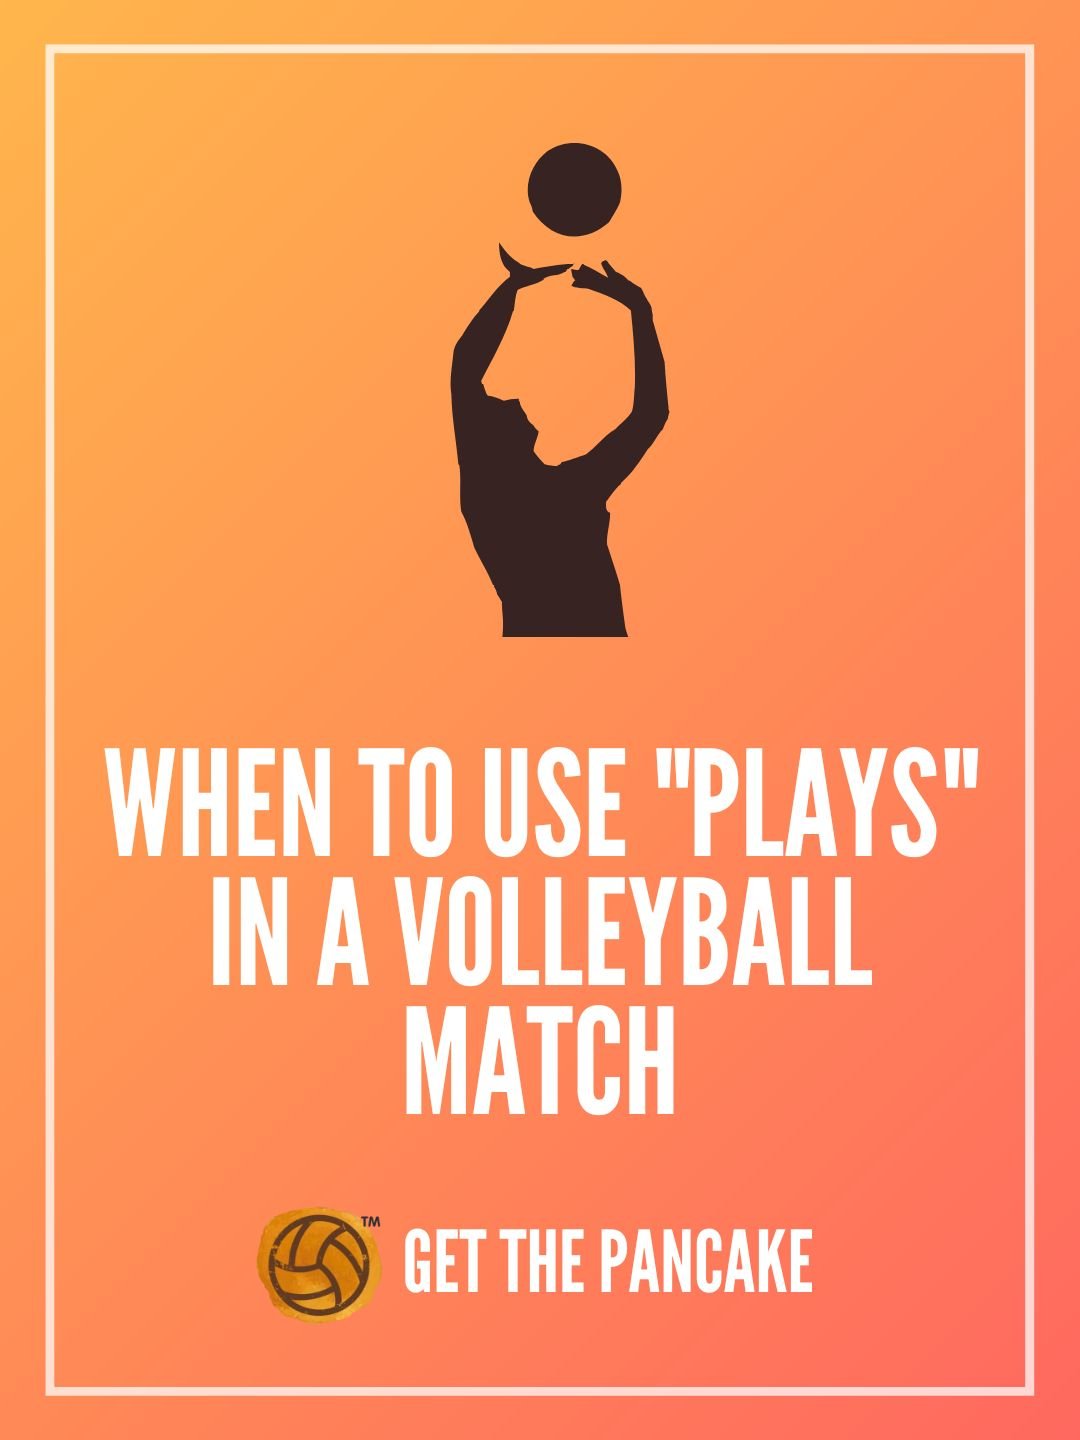 Get The Pancake | Tools for Volleyball Coaches